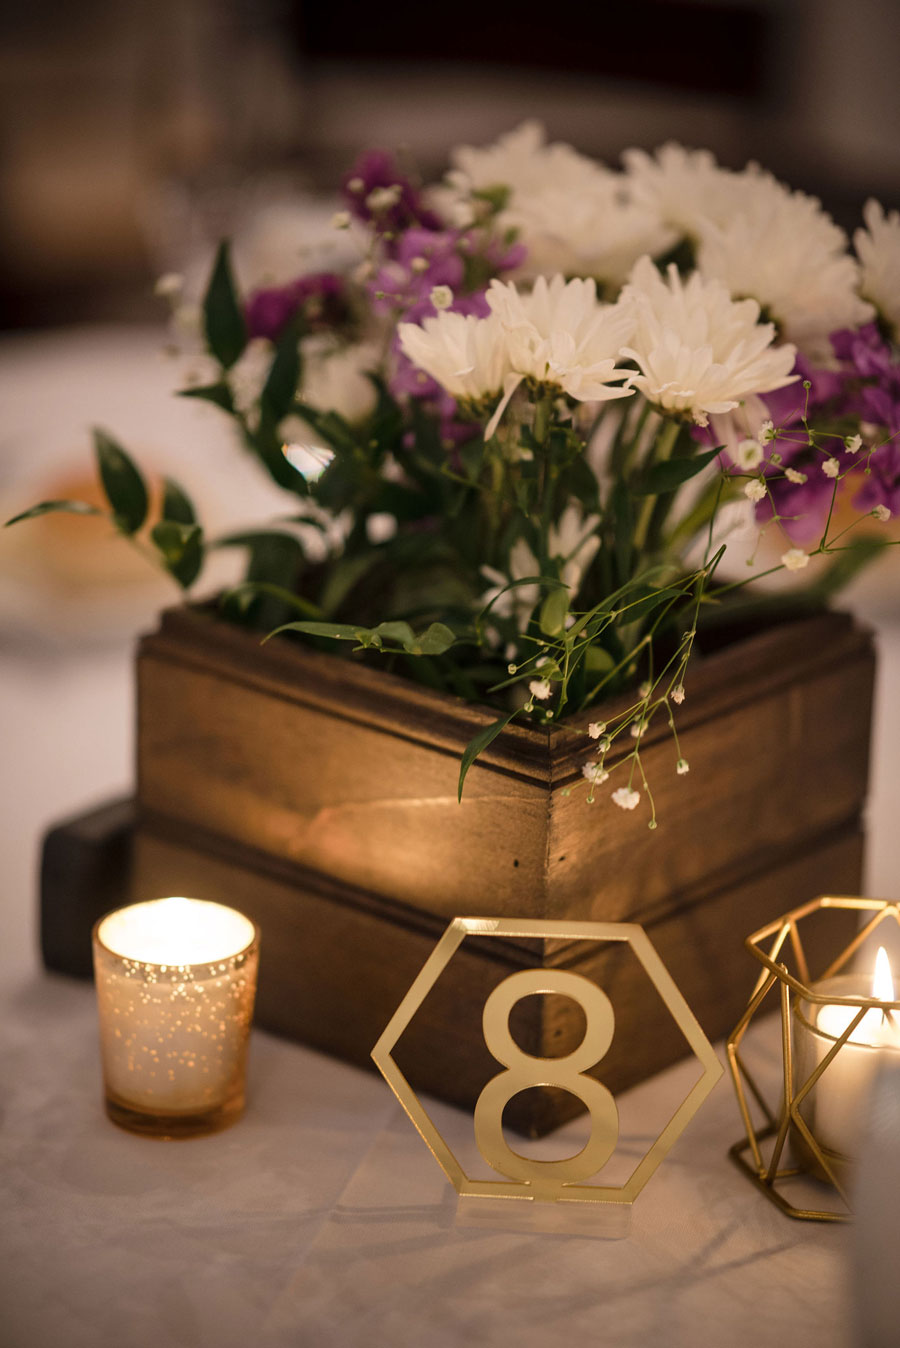 Brushed metal table numbers with floral arrangements